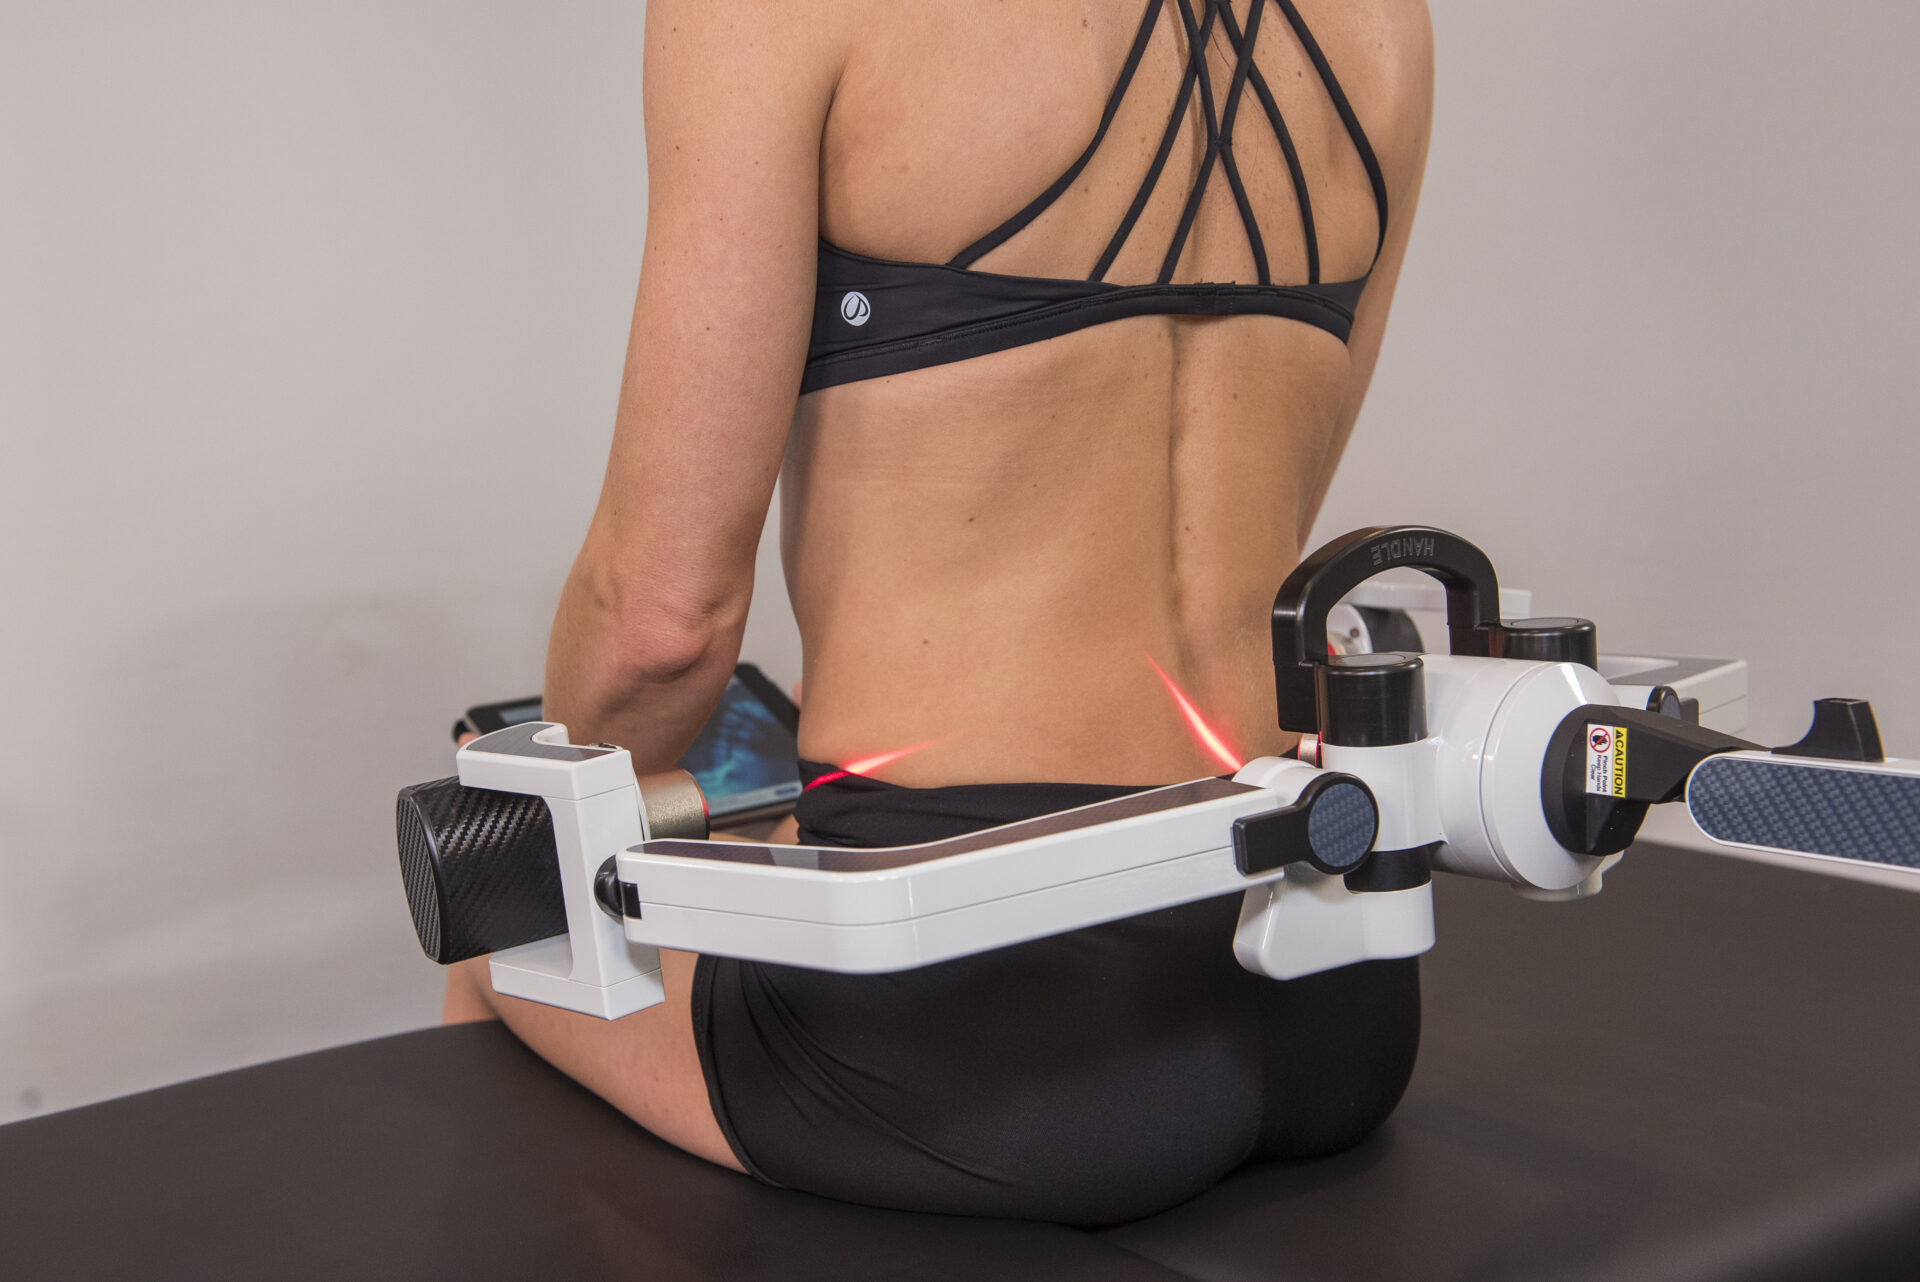 FX 635 laser being used on a woman's back